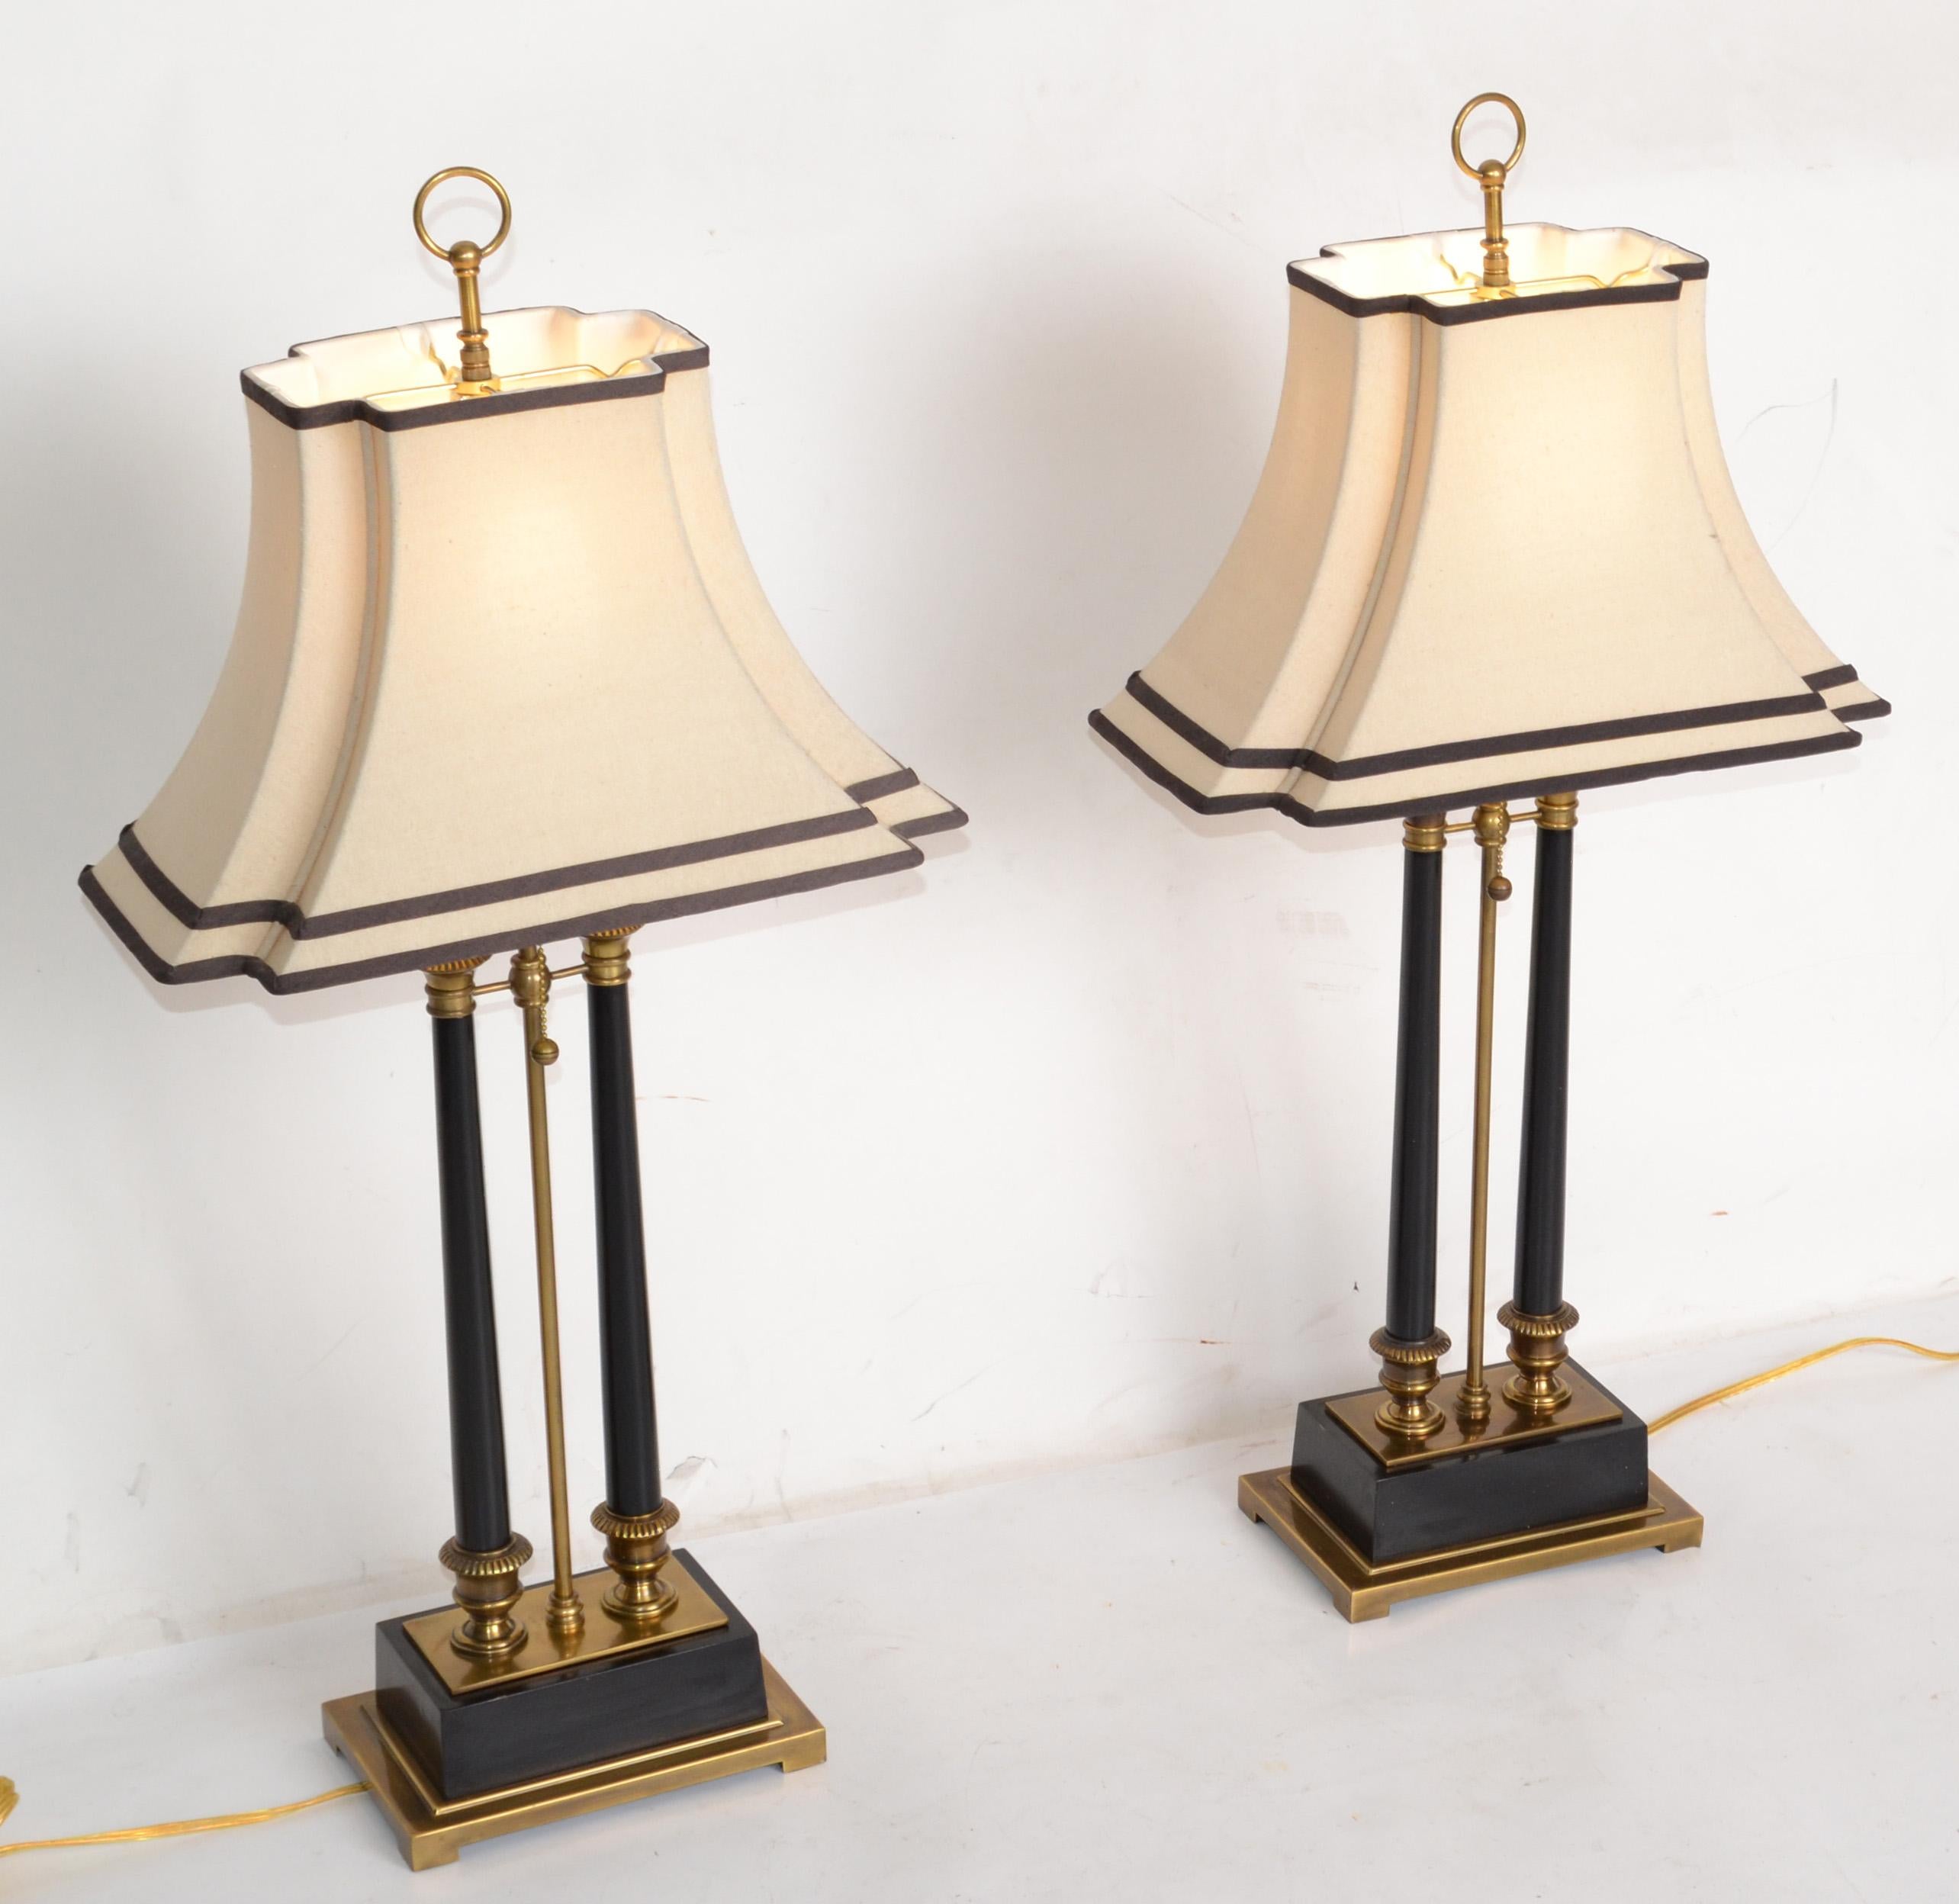 A pair of Mid-Century Modern Empire Style big scale brass and ebonized wood rectangular solid brass table lamps.
The Pair comes with Harps, matching finials, shades and are heavy.
In perfect working condition, UL Listed and each uses a max. 100